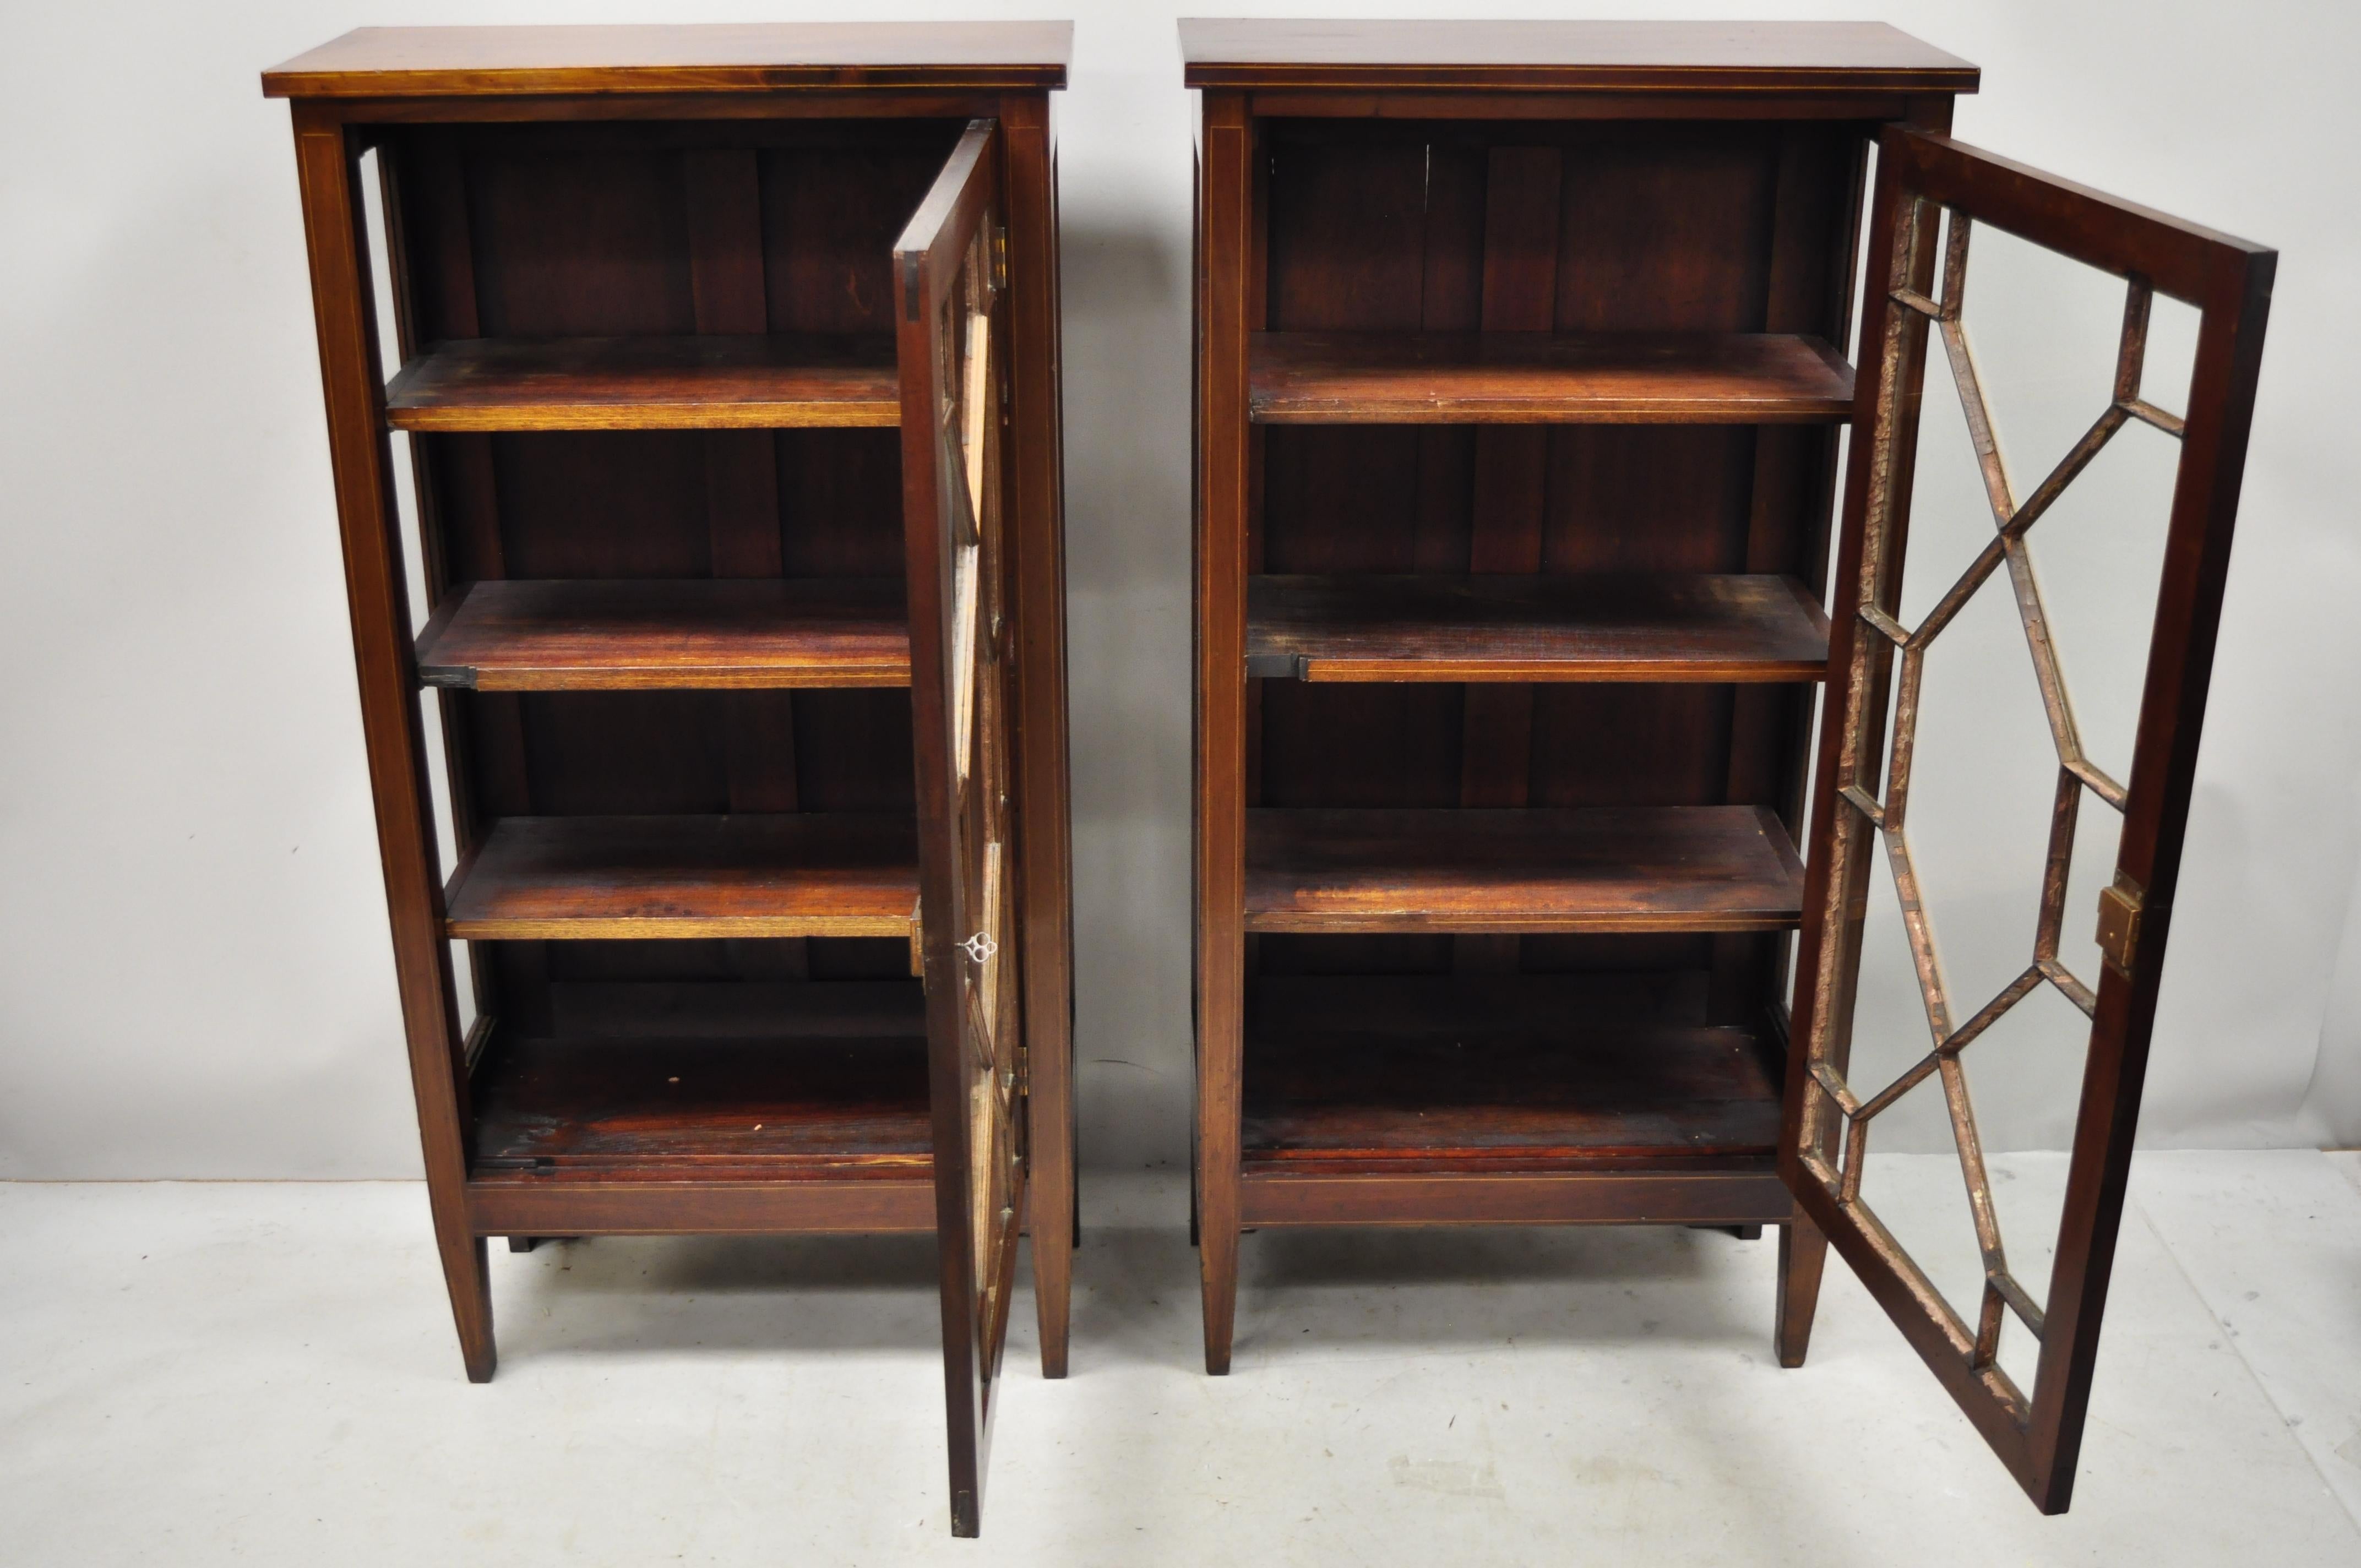 Pair of Crotch Mahogany Inlaid Edwardian Glass Display Cabinet Curio Bookcases 2